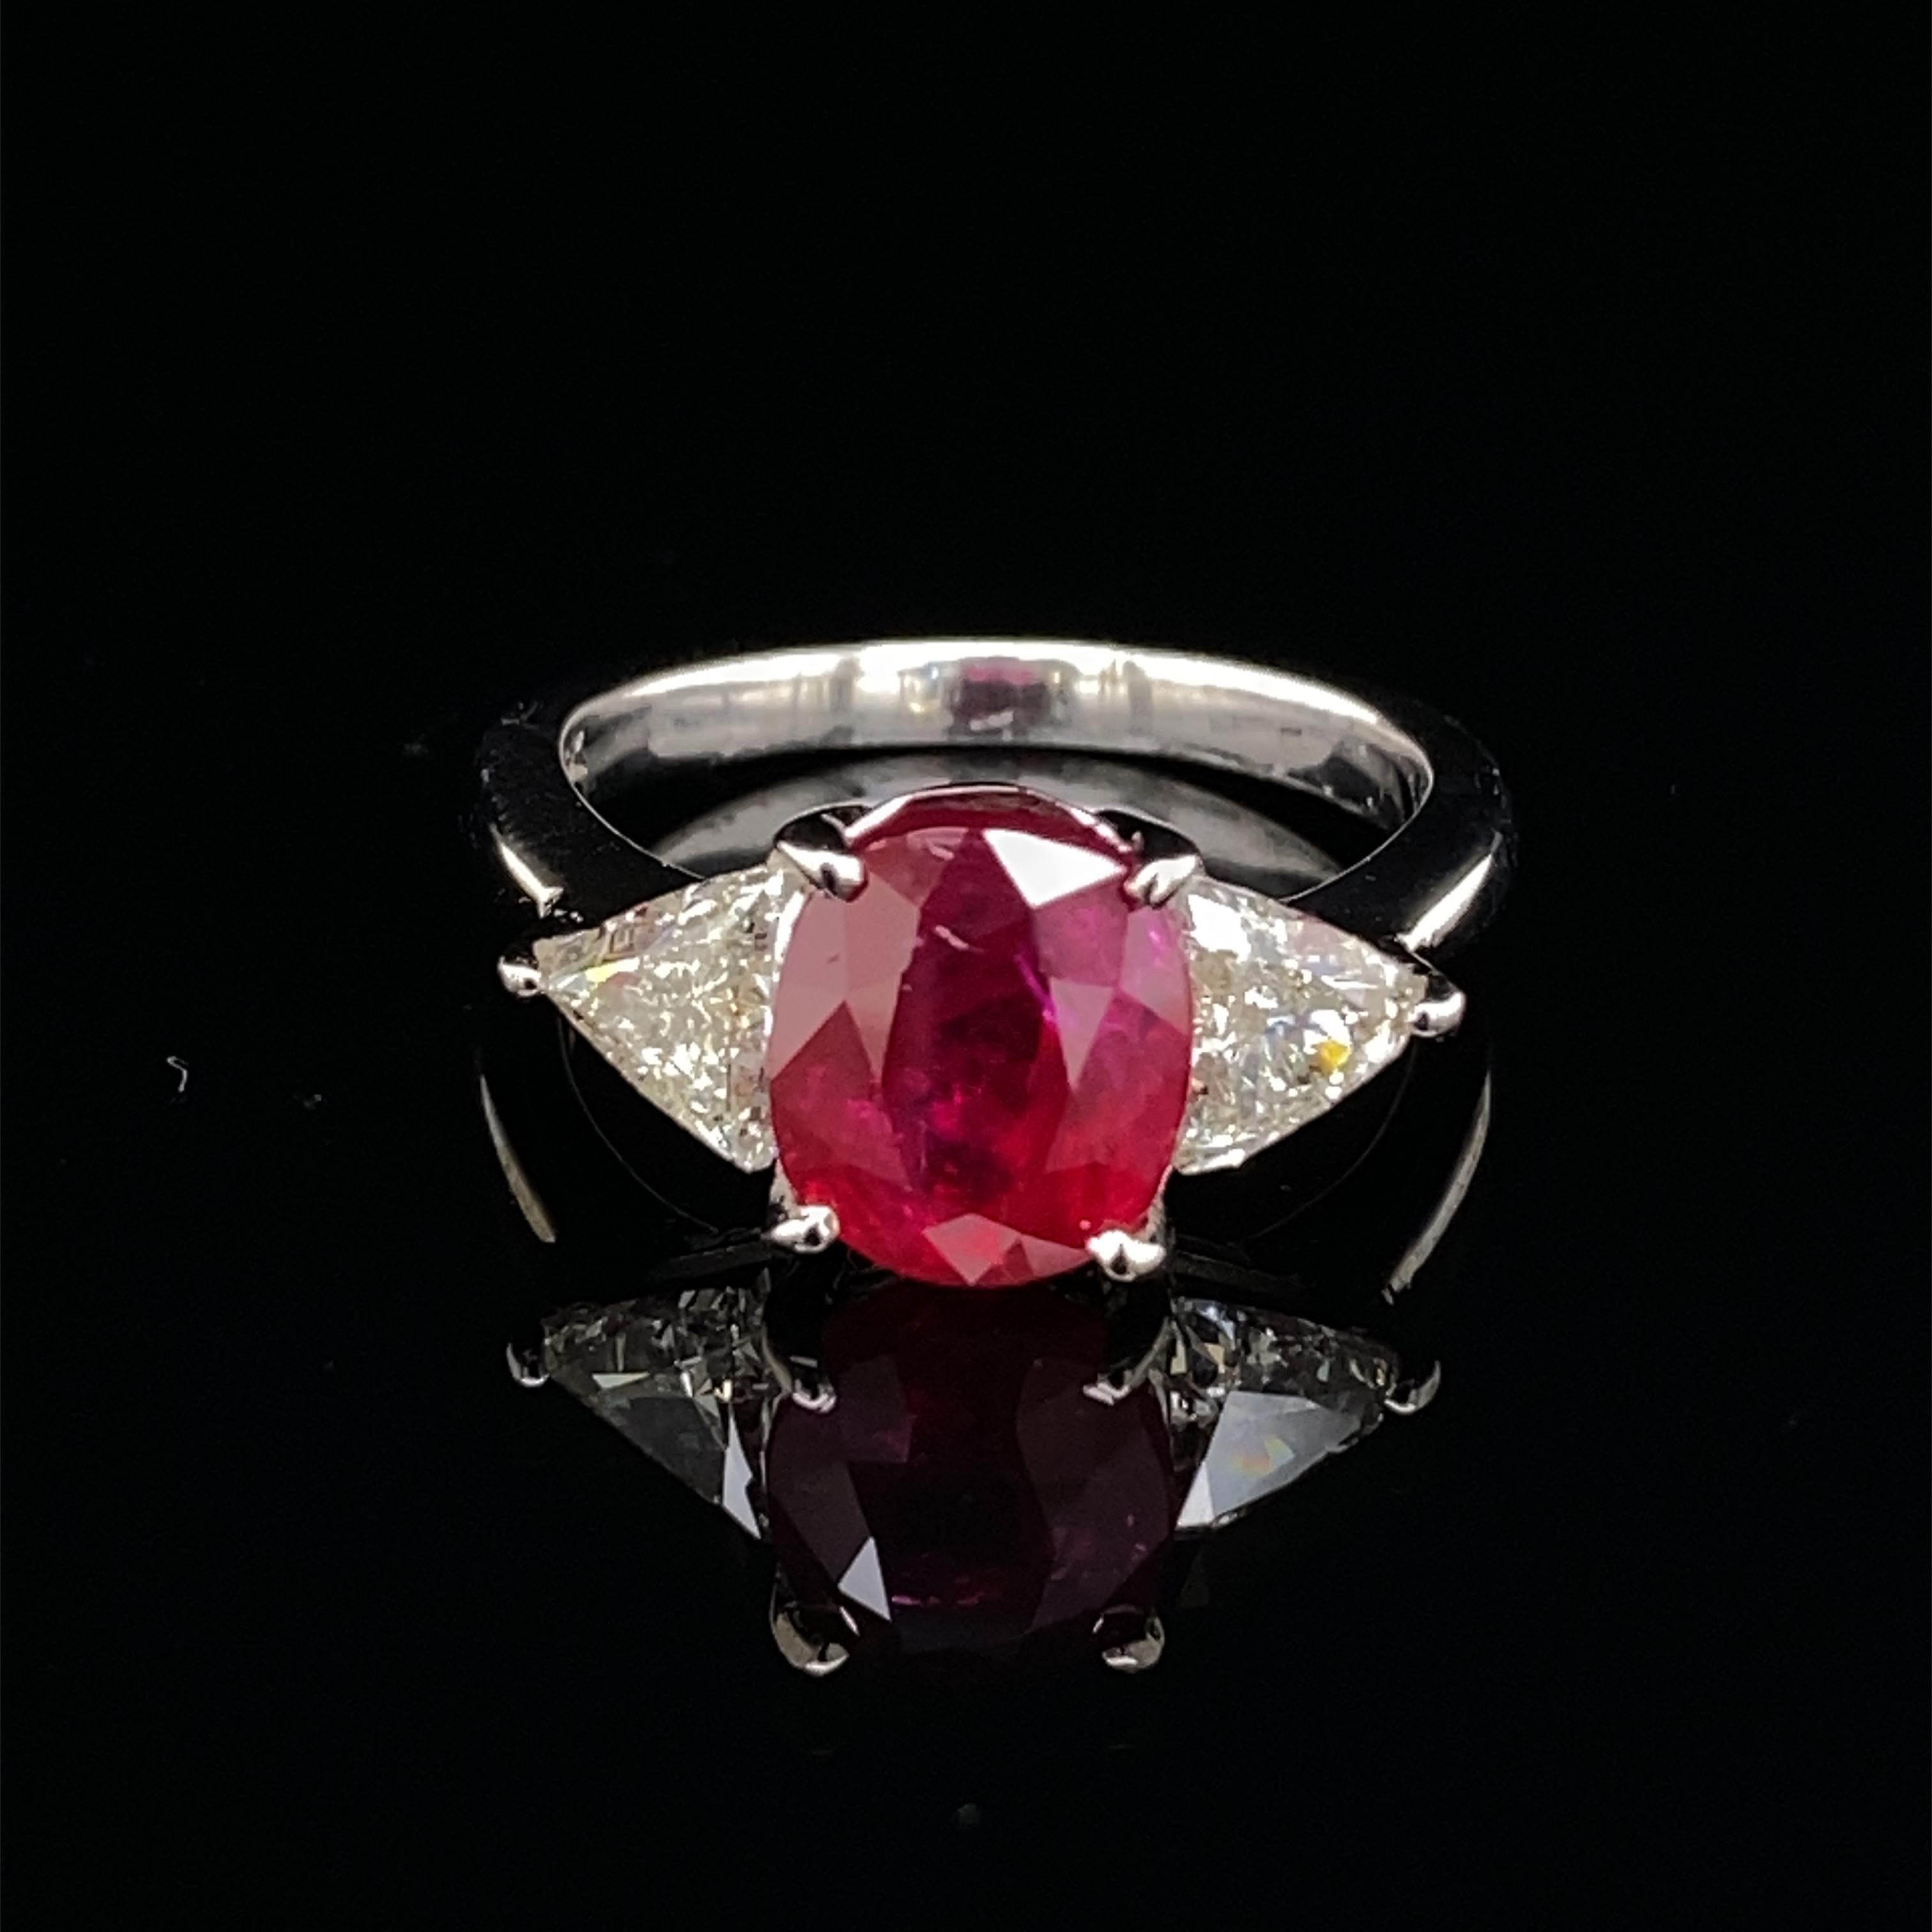 Exceptional Ruby with diamond three stone ring.
Apx 2.30 carat oval ruby complimented with 2 trilliant diamonds, apx 1ct. Approximately H/I color and VS clarity. 3.30ct total gemstone weight, in 18k white gold. 
Accommodated with an up to date